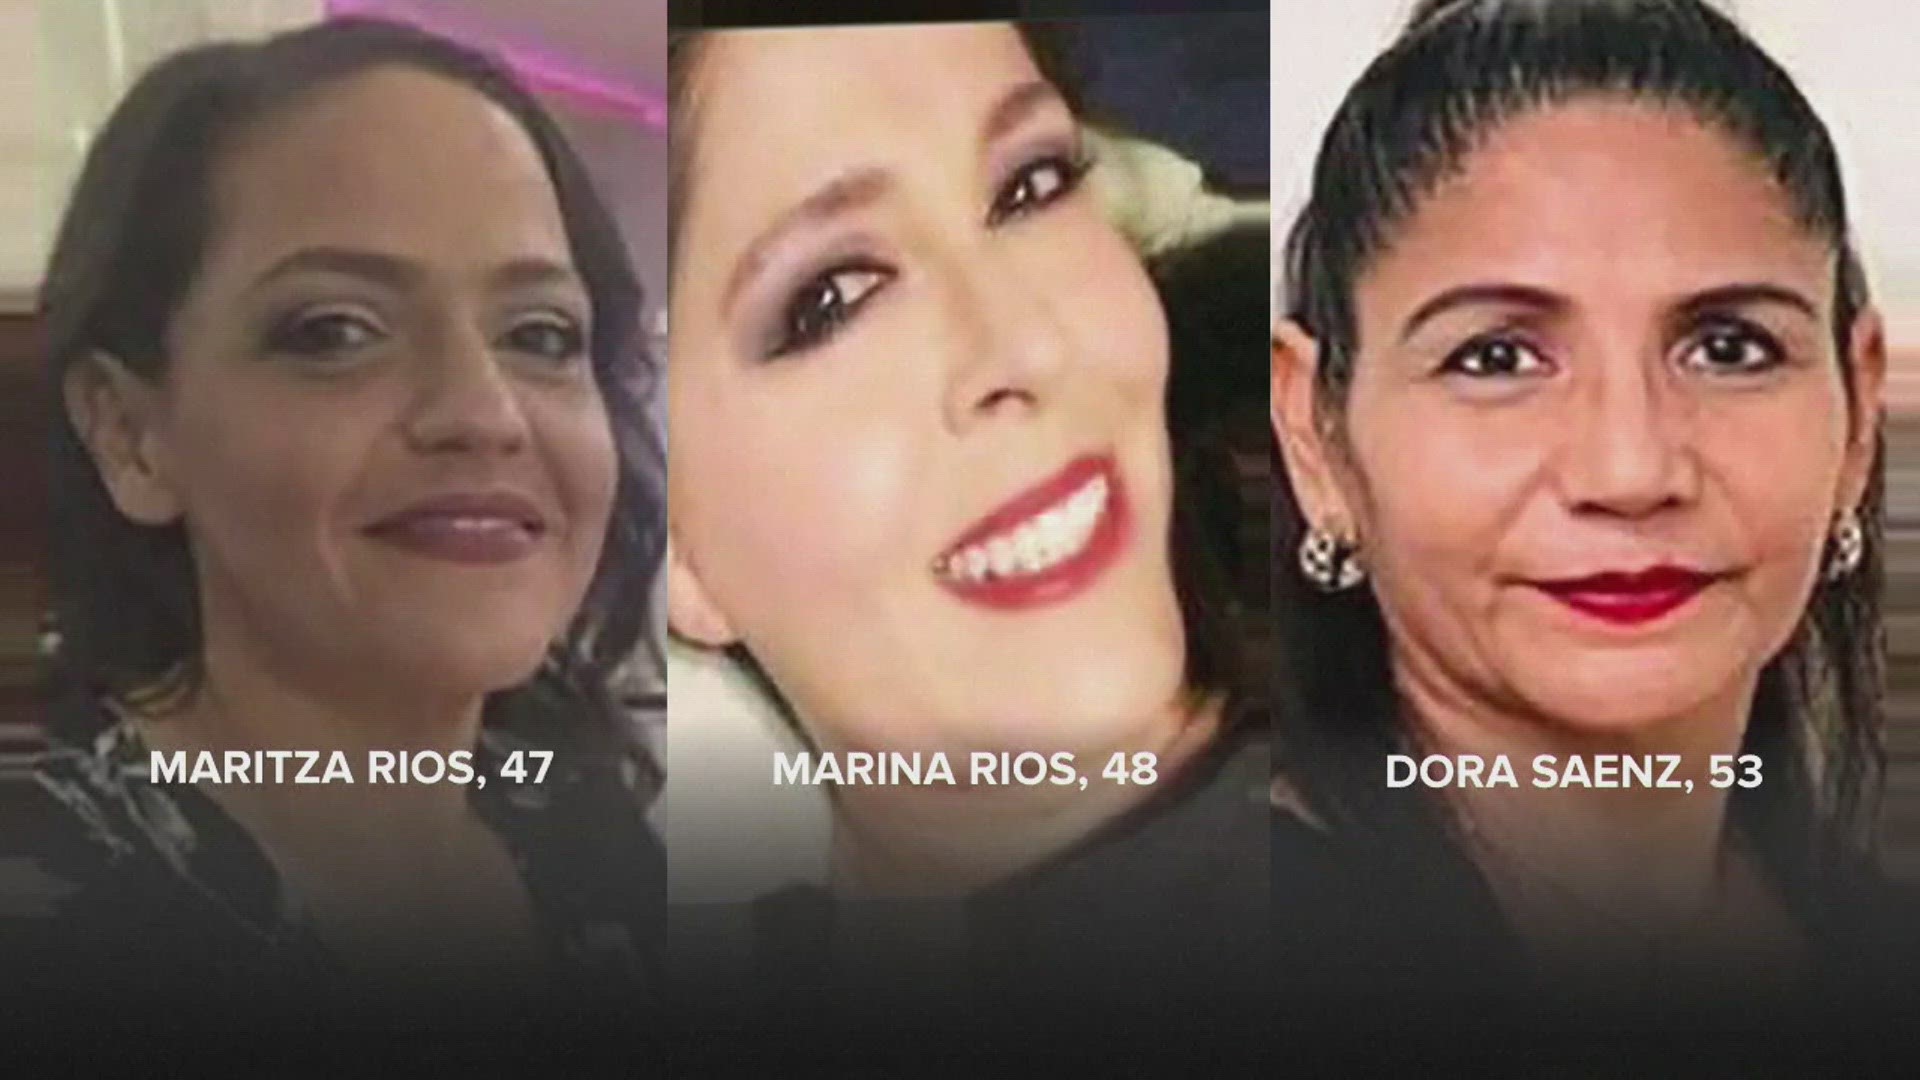 U.S. authorities say three women haven’t been heard from since they traveled from Texas into Mexico two weeks ago.